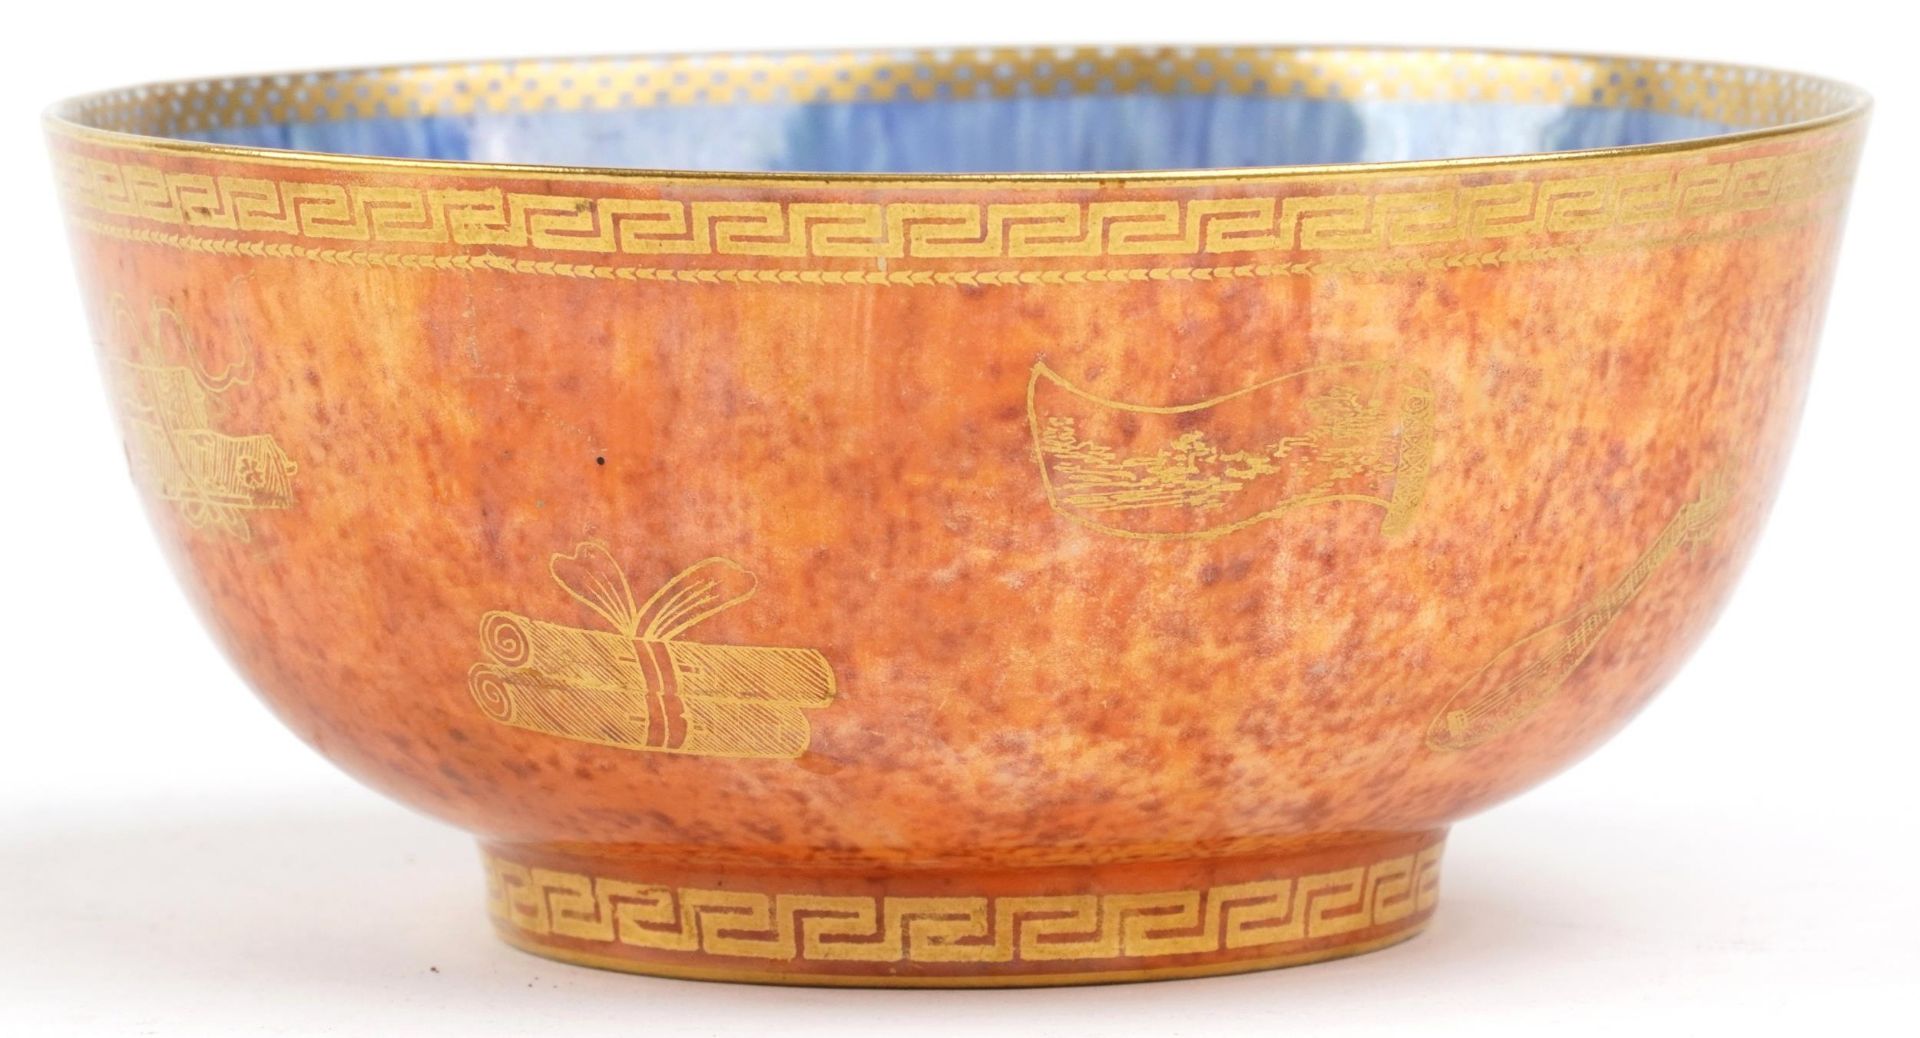 Wedgwood orange and blue ground Fairyland lustre bowl gilded with dragons chasing the flaming